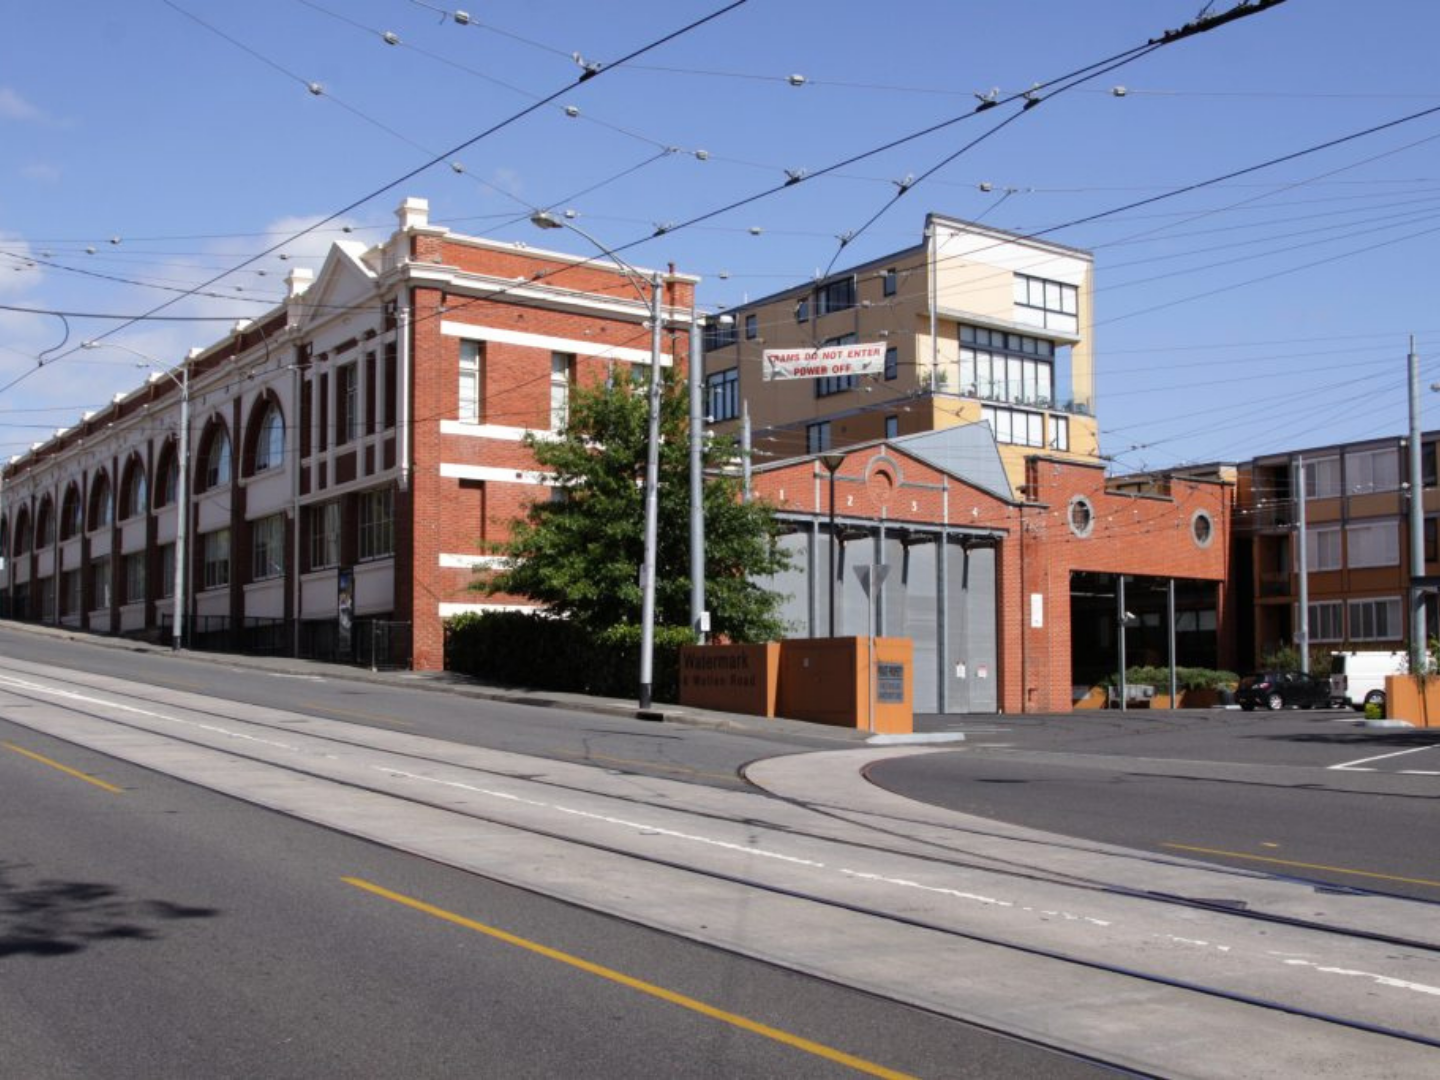 Exterior view of Hawthorn Tram Depot on a sunny day.